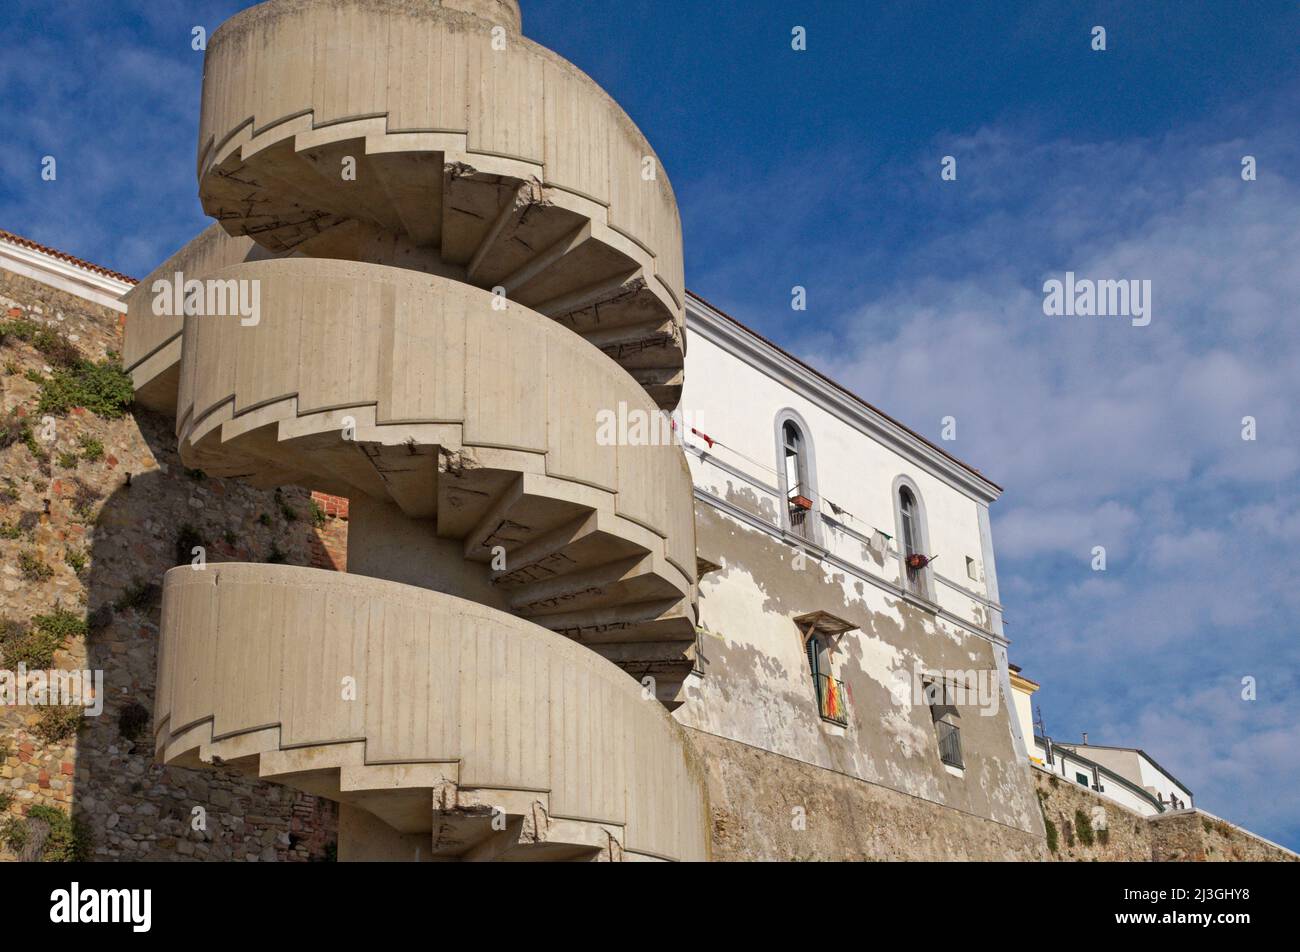 concrete spiral staircase at the exterior of the city walls in Termoli, Molise region, Italy Stock Photo